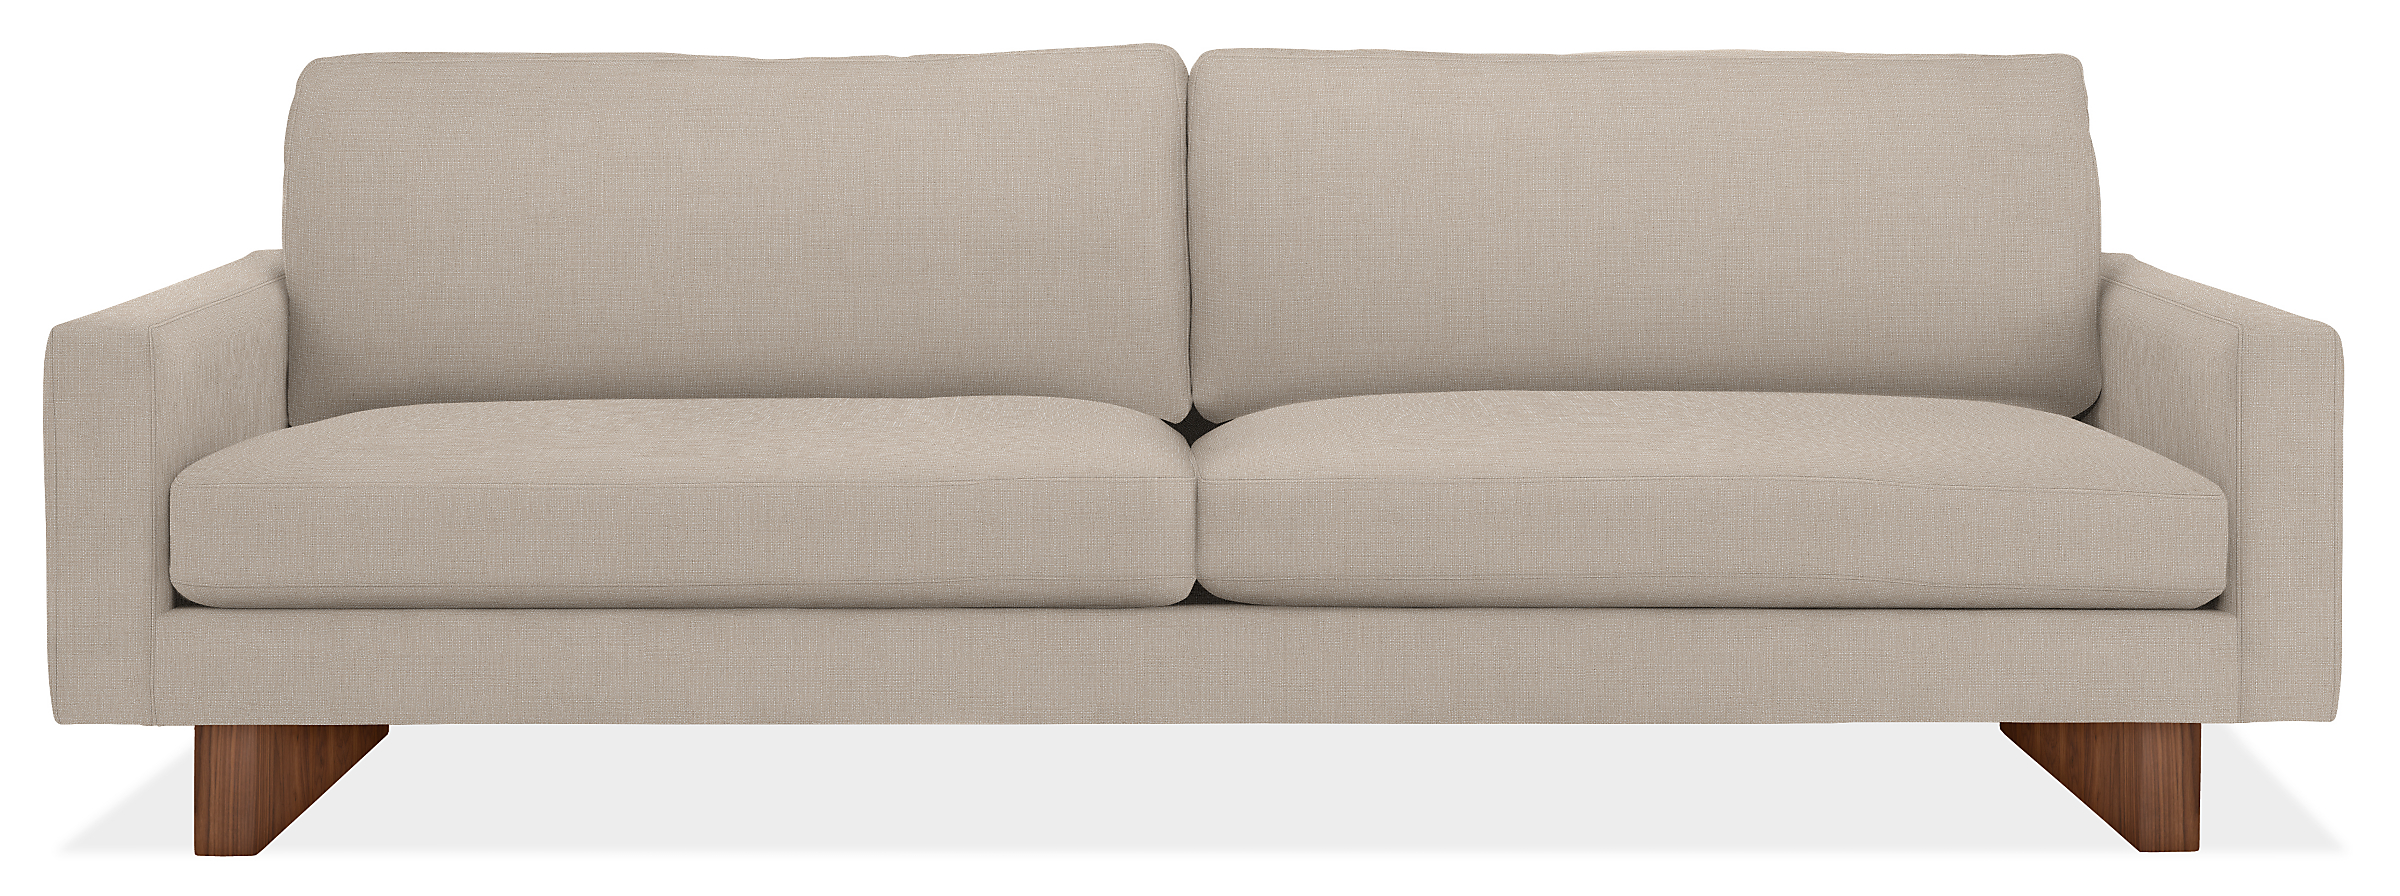 Pierson 89" Sofa with Wood Base/Legs